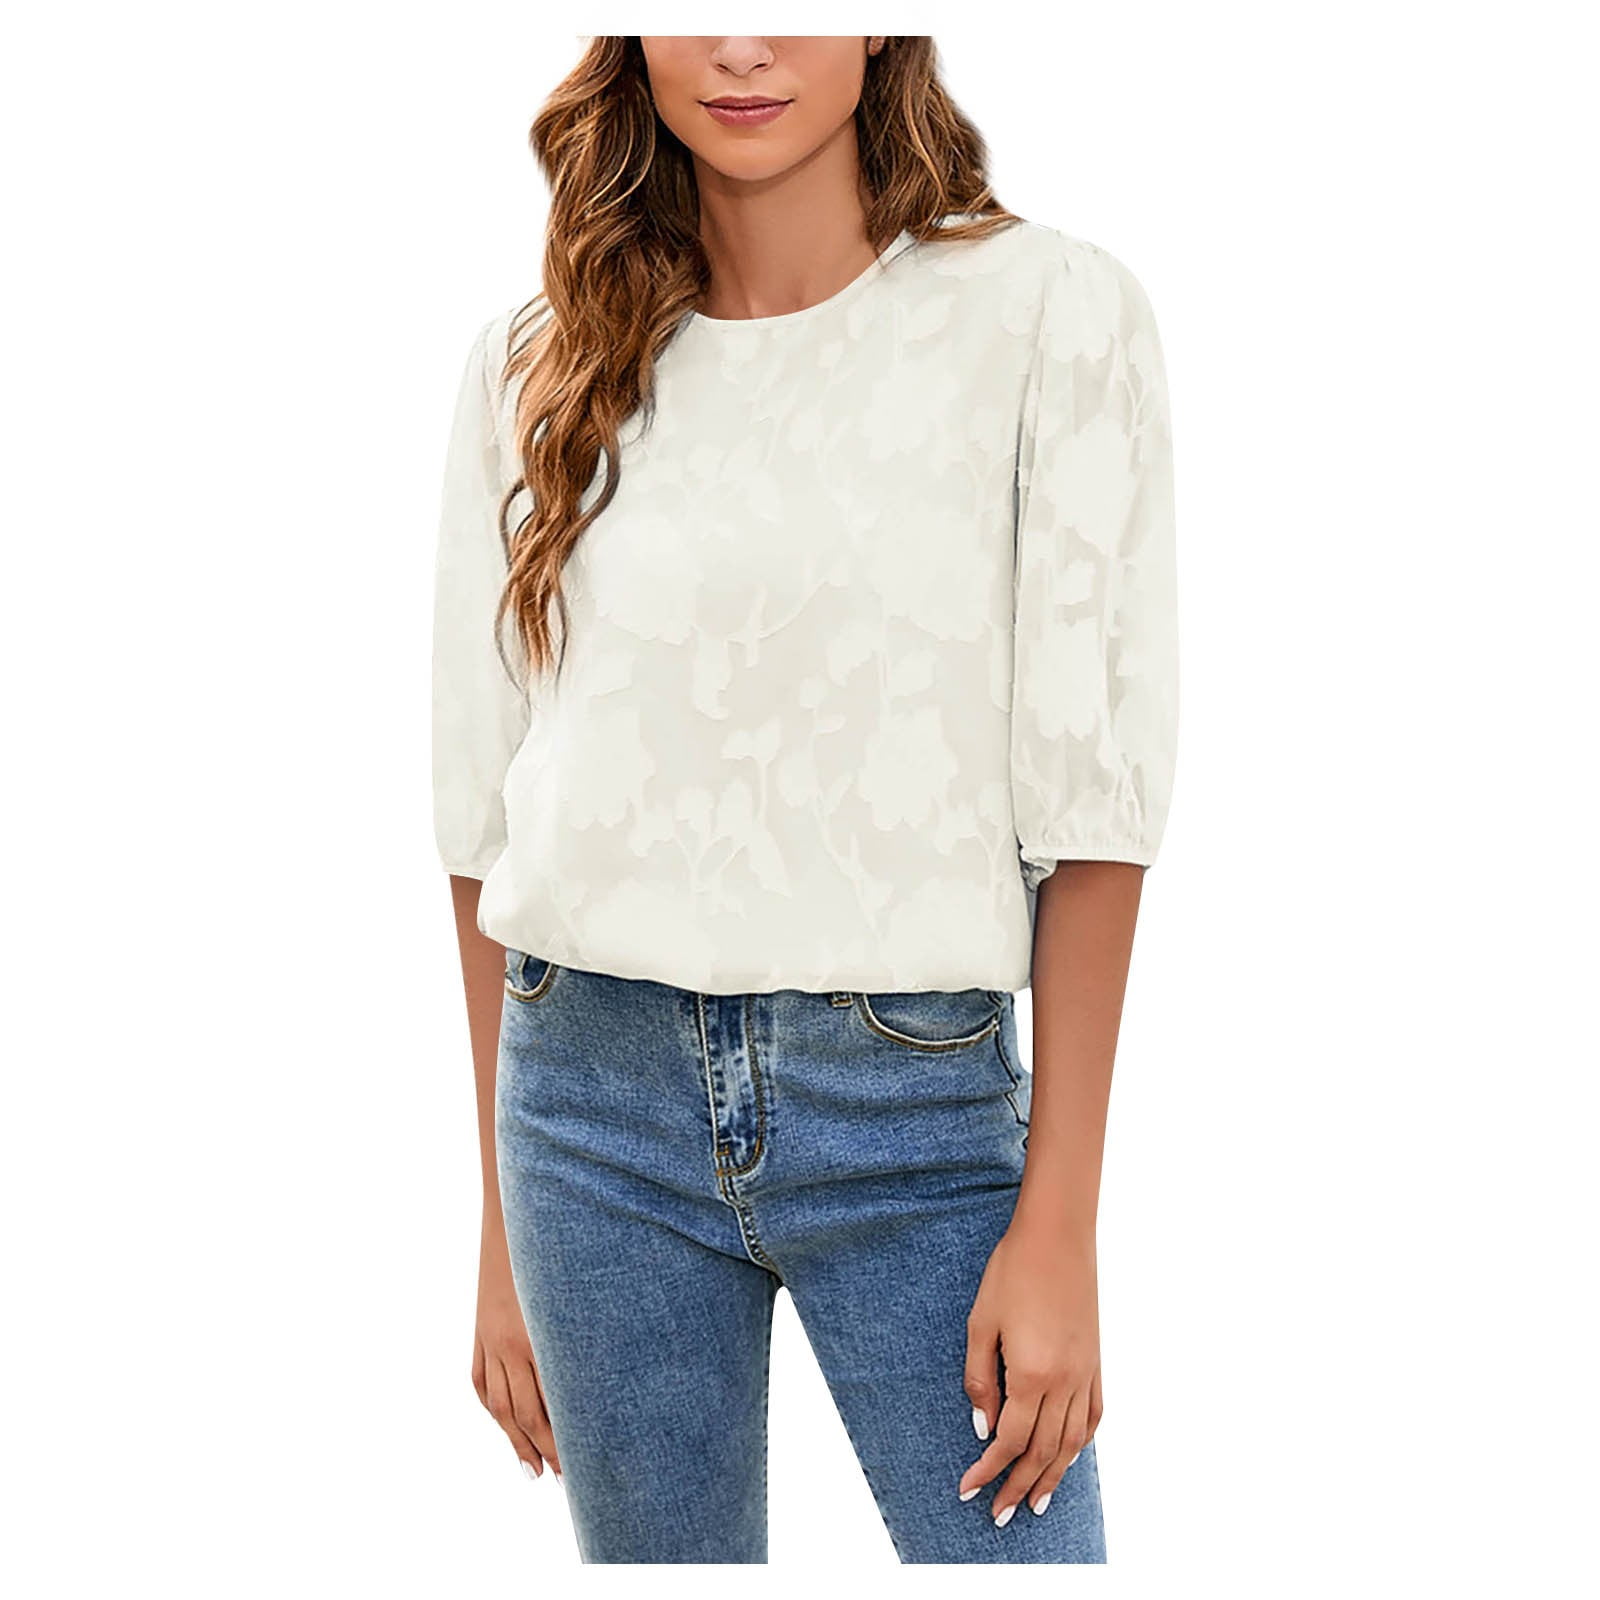 Womens Puff Sleeve T Shirts 3/4 Sleeve Crew Neck Lace Casual Fit Summer Tees Tops - Walmart.com